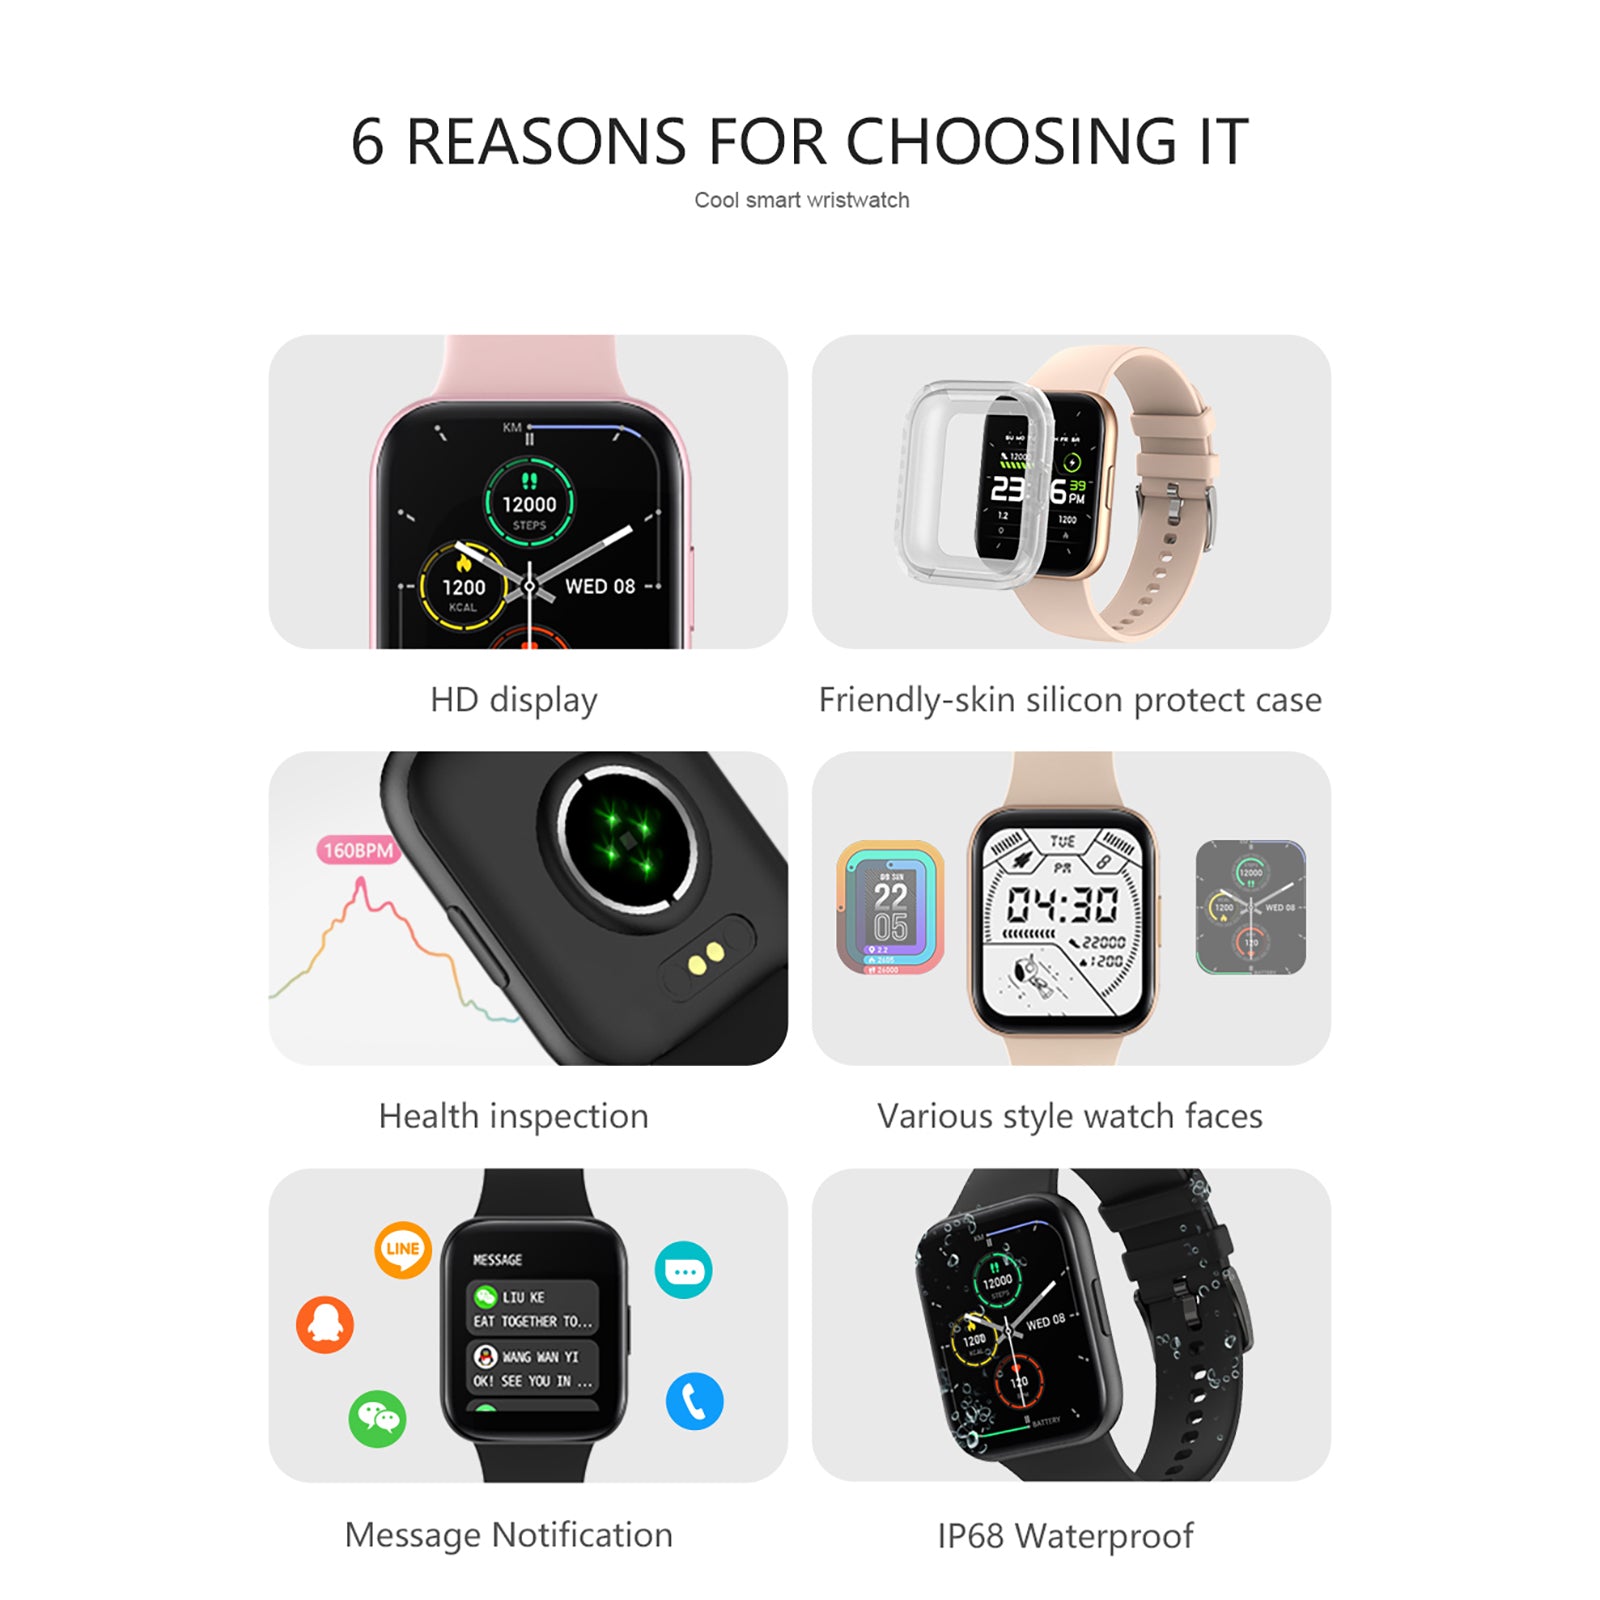 Smart Watch Fitness Tracker with Heart Rate/Blood Pressure/Sleep Monitor/8 Exercise Modes